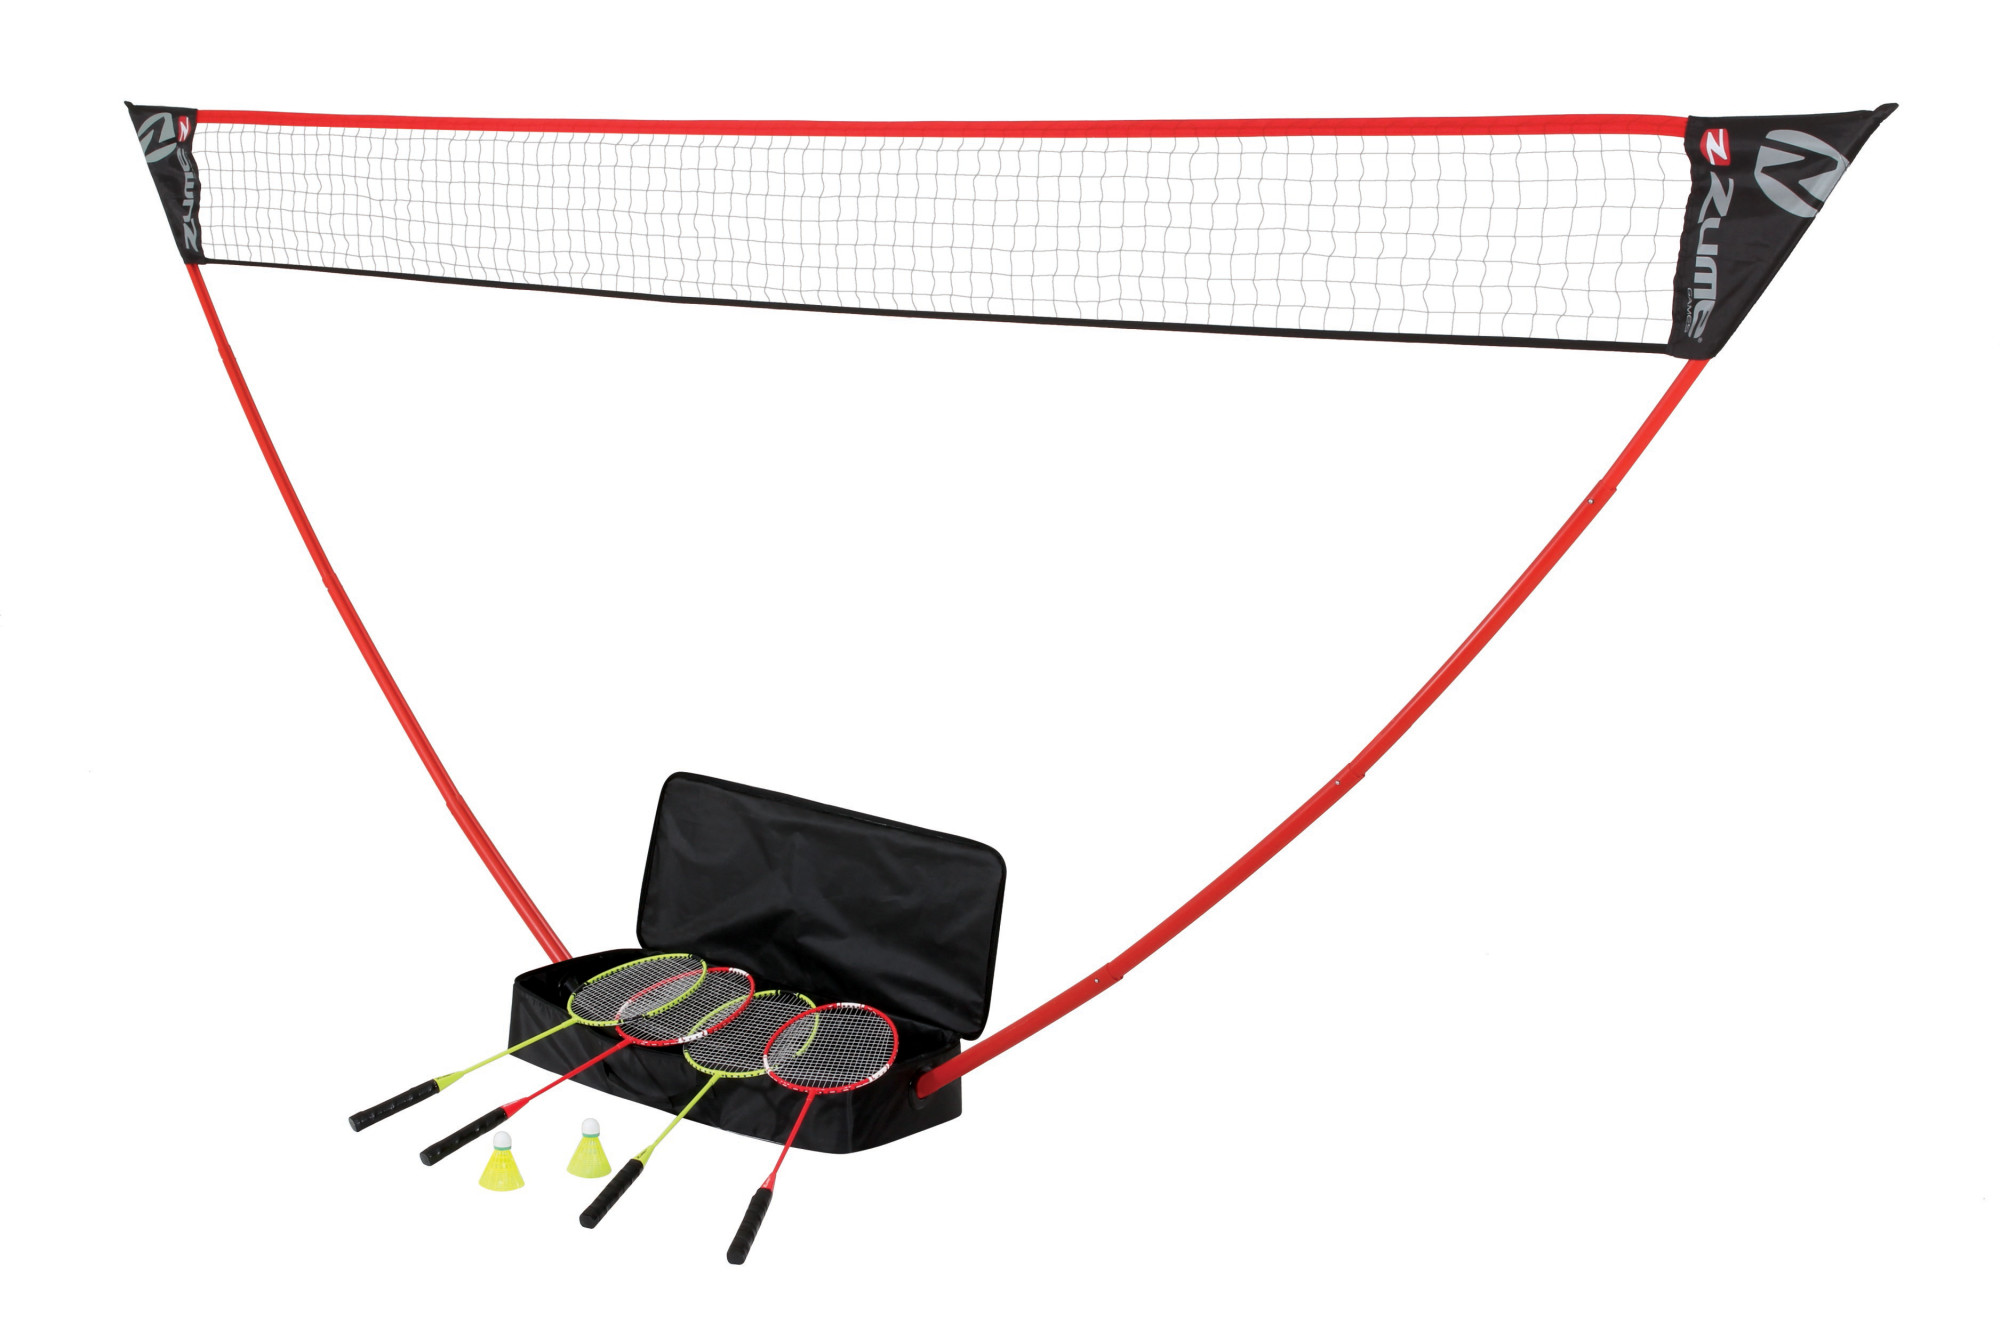 Zume Games Portable Badminton Set with Freestanding Base Sets Up on Any Surface in Seconds. No Tools or Stakes Required - image 1 of 12